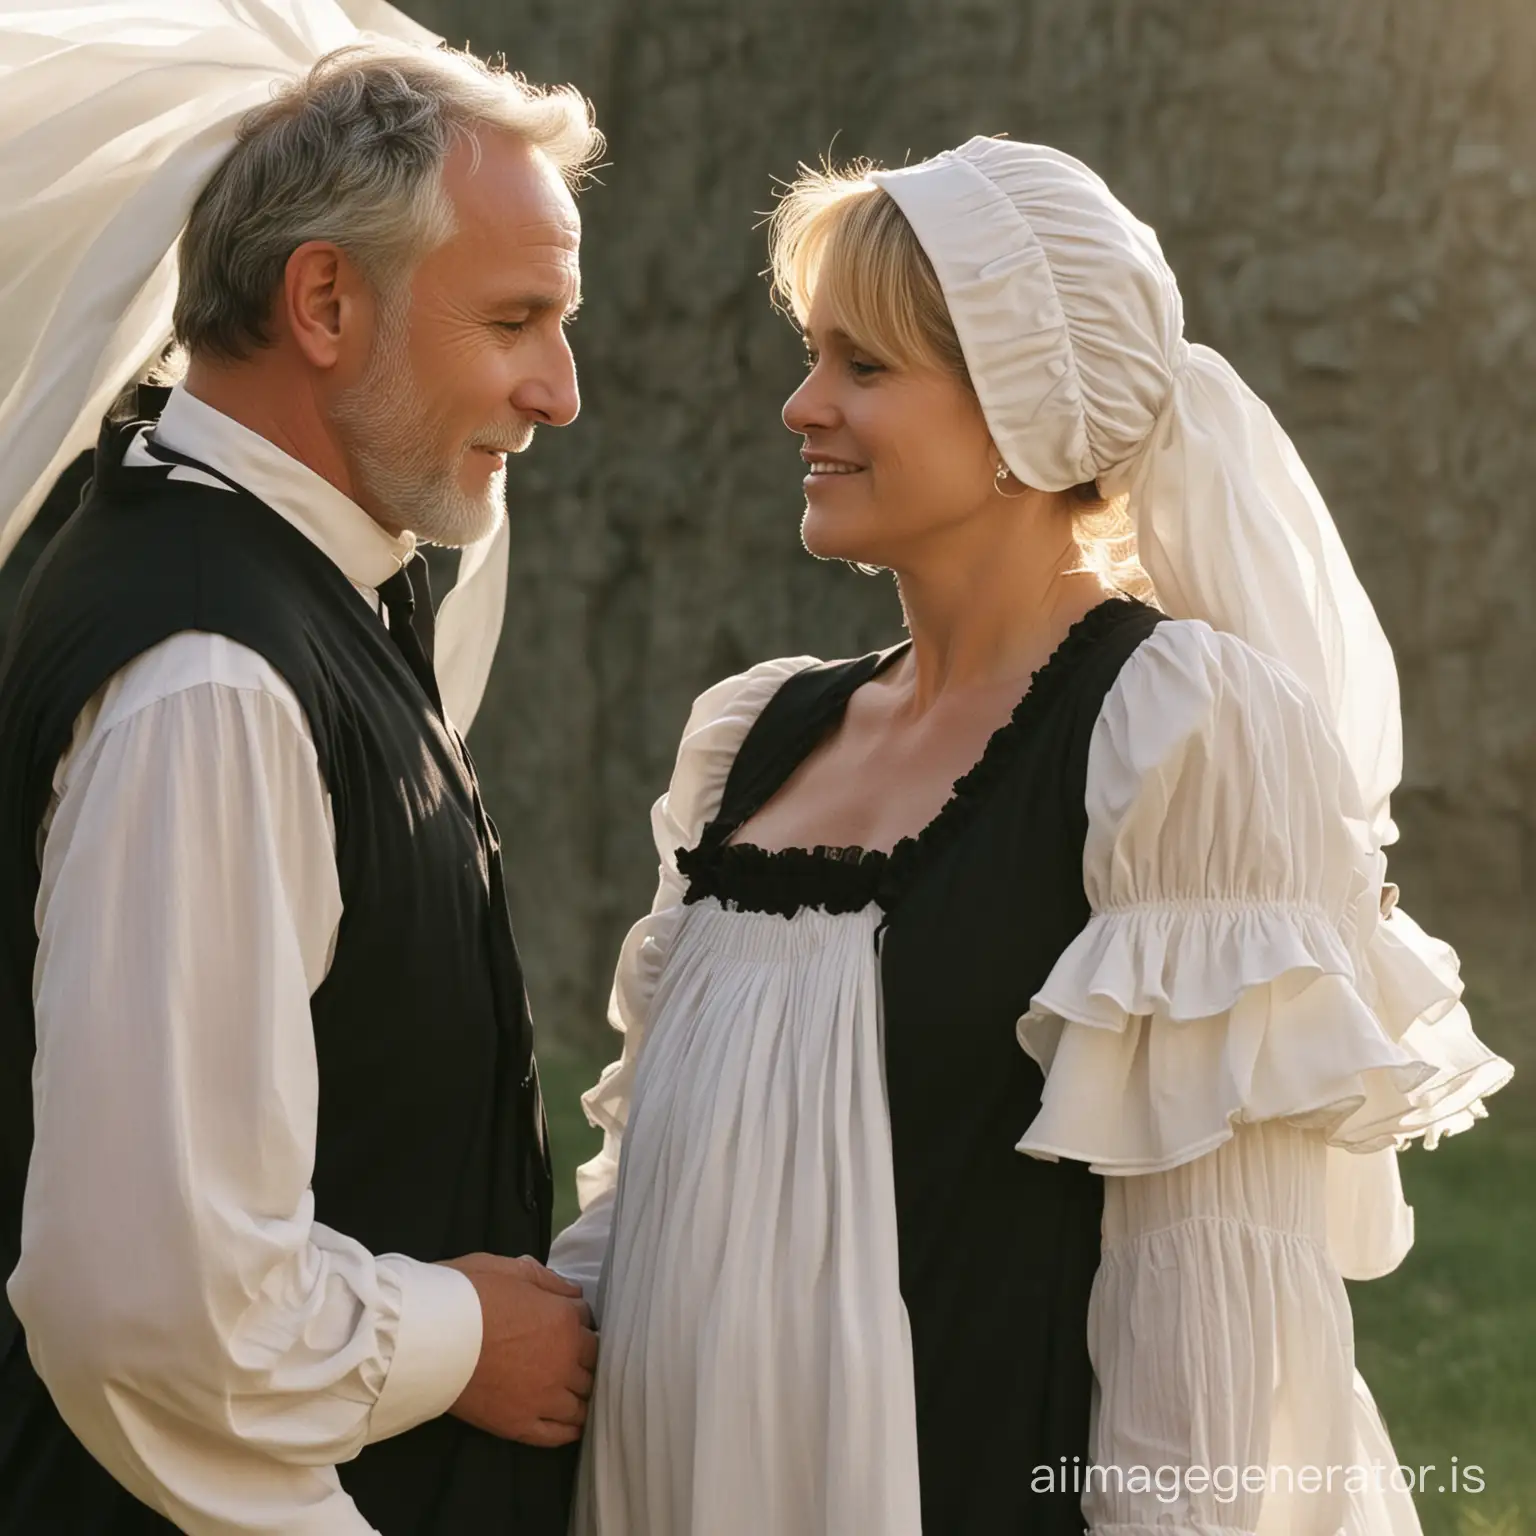 Newlywed-Amish-Couple-Embracing-in-Traditional-Attire